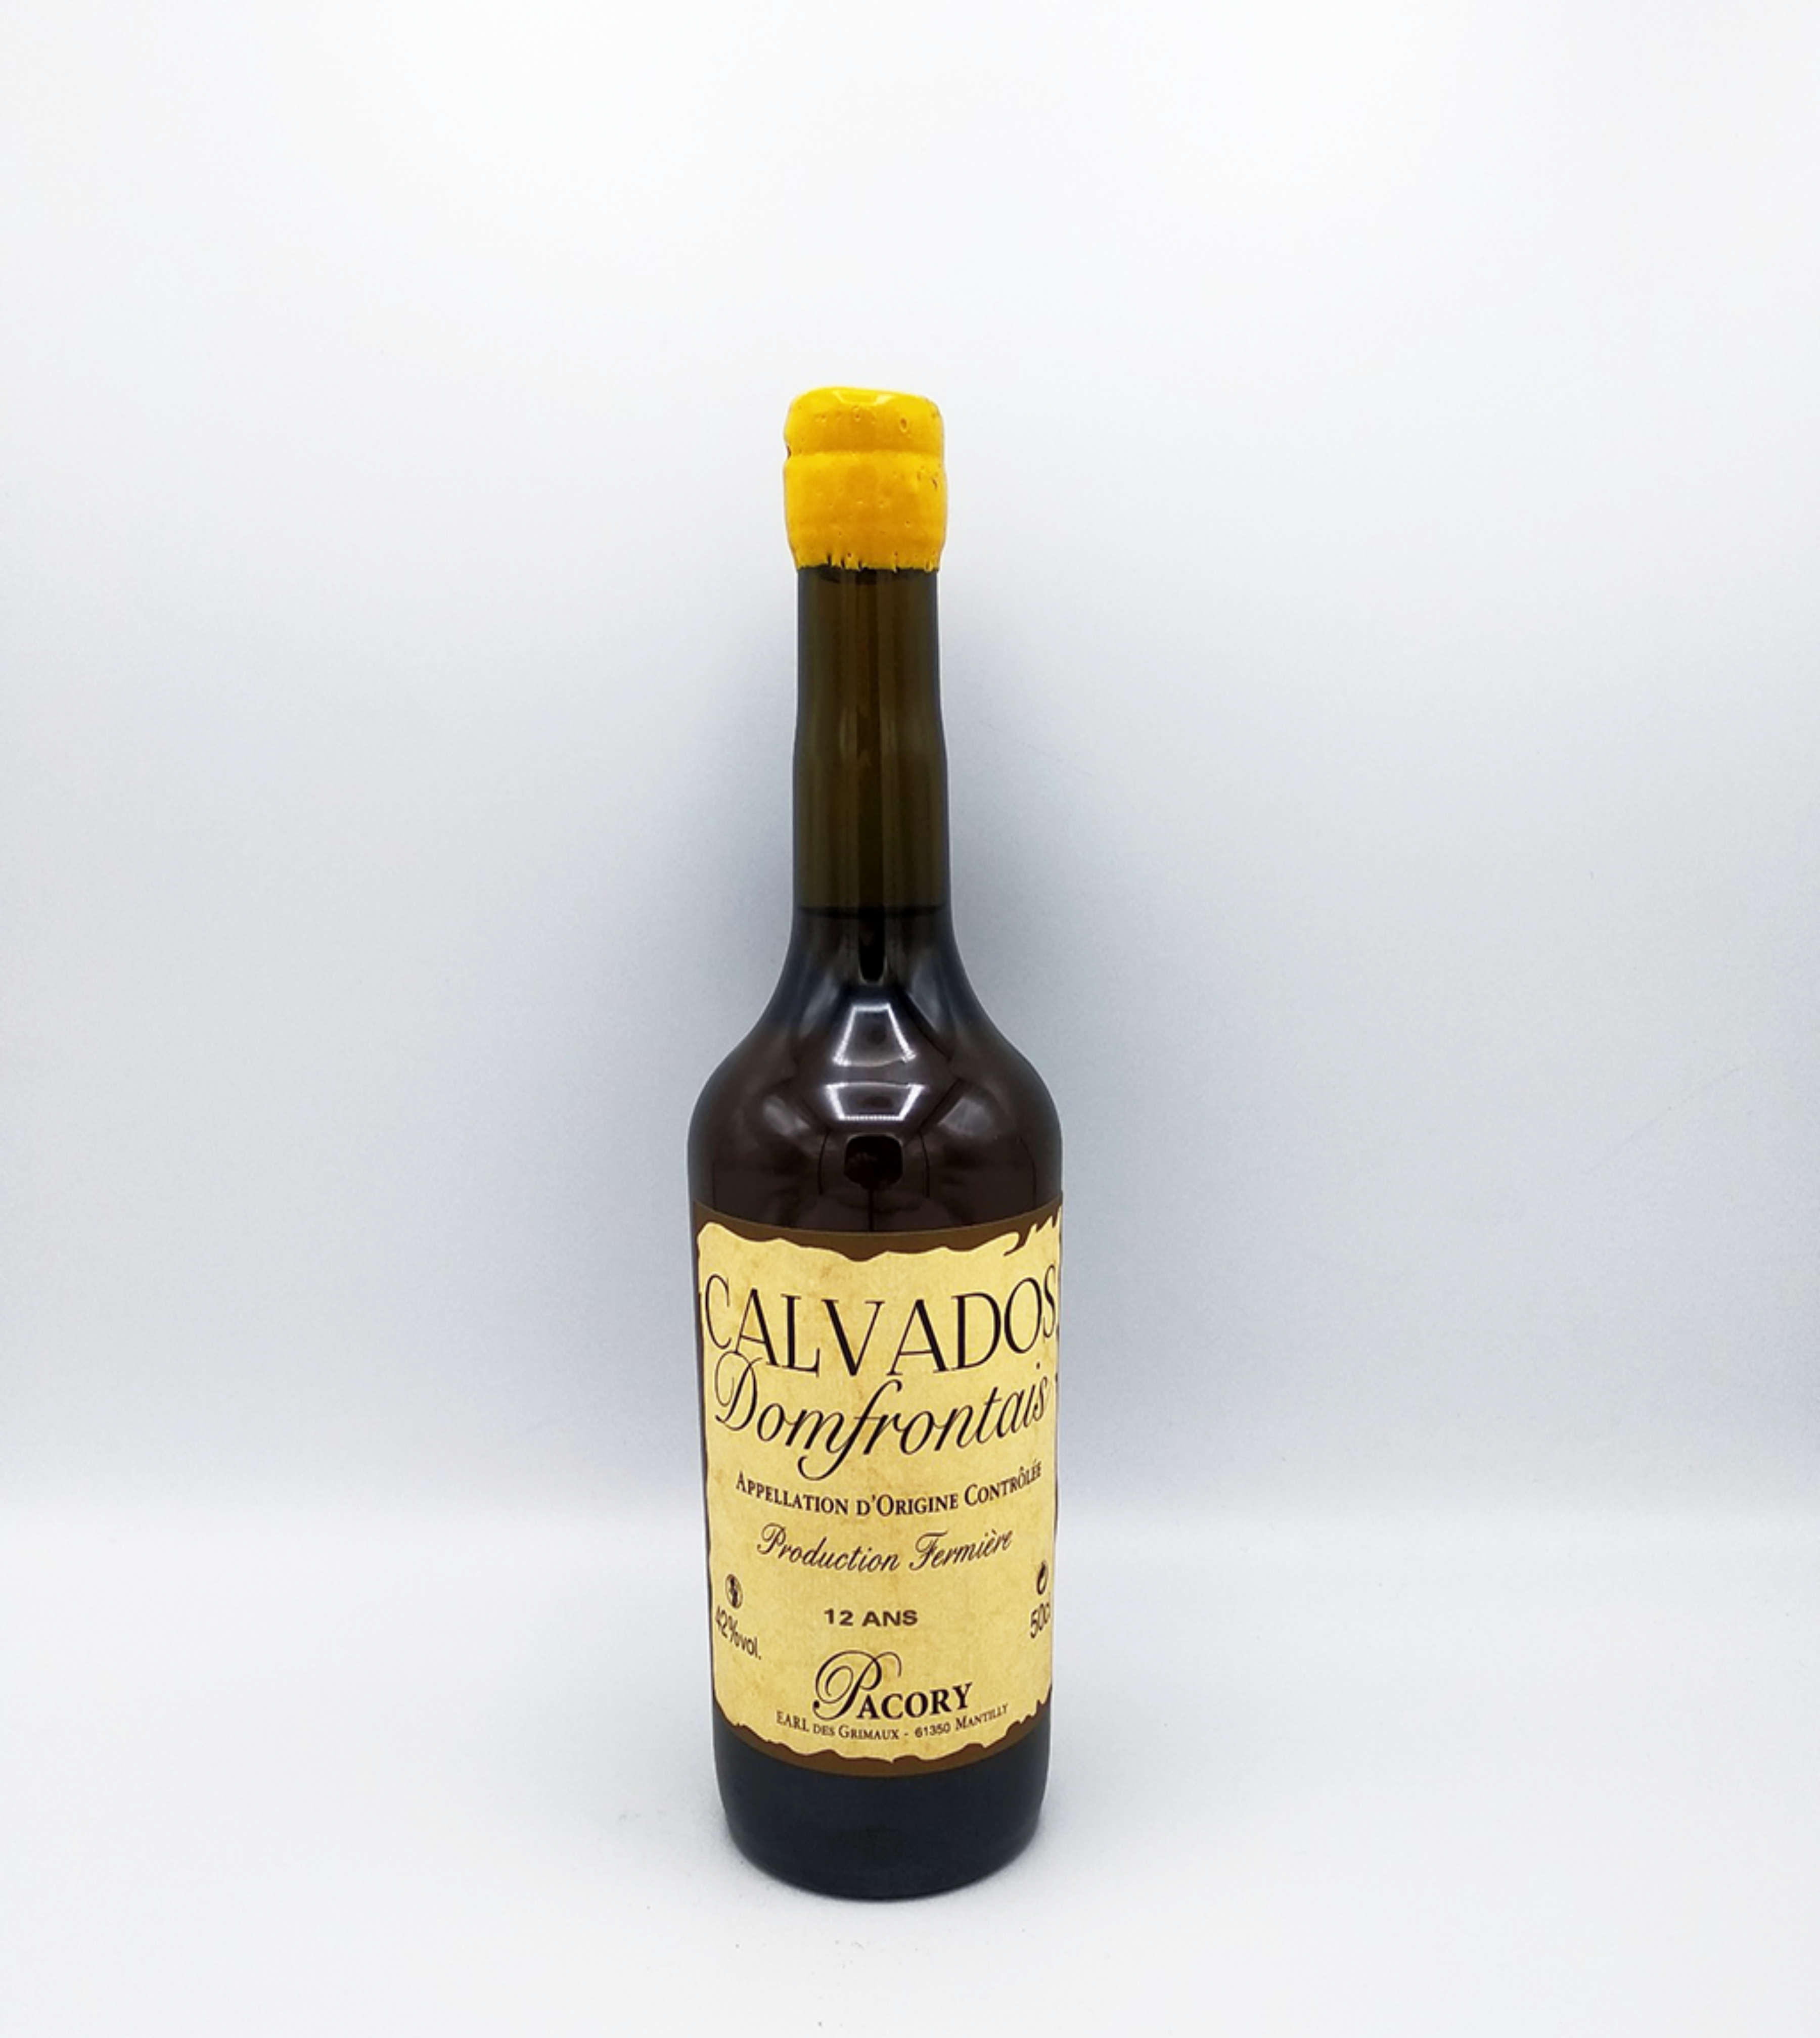 AOP CALVADOS 12 years 35cl - Pacory